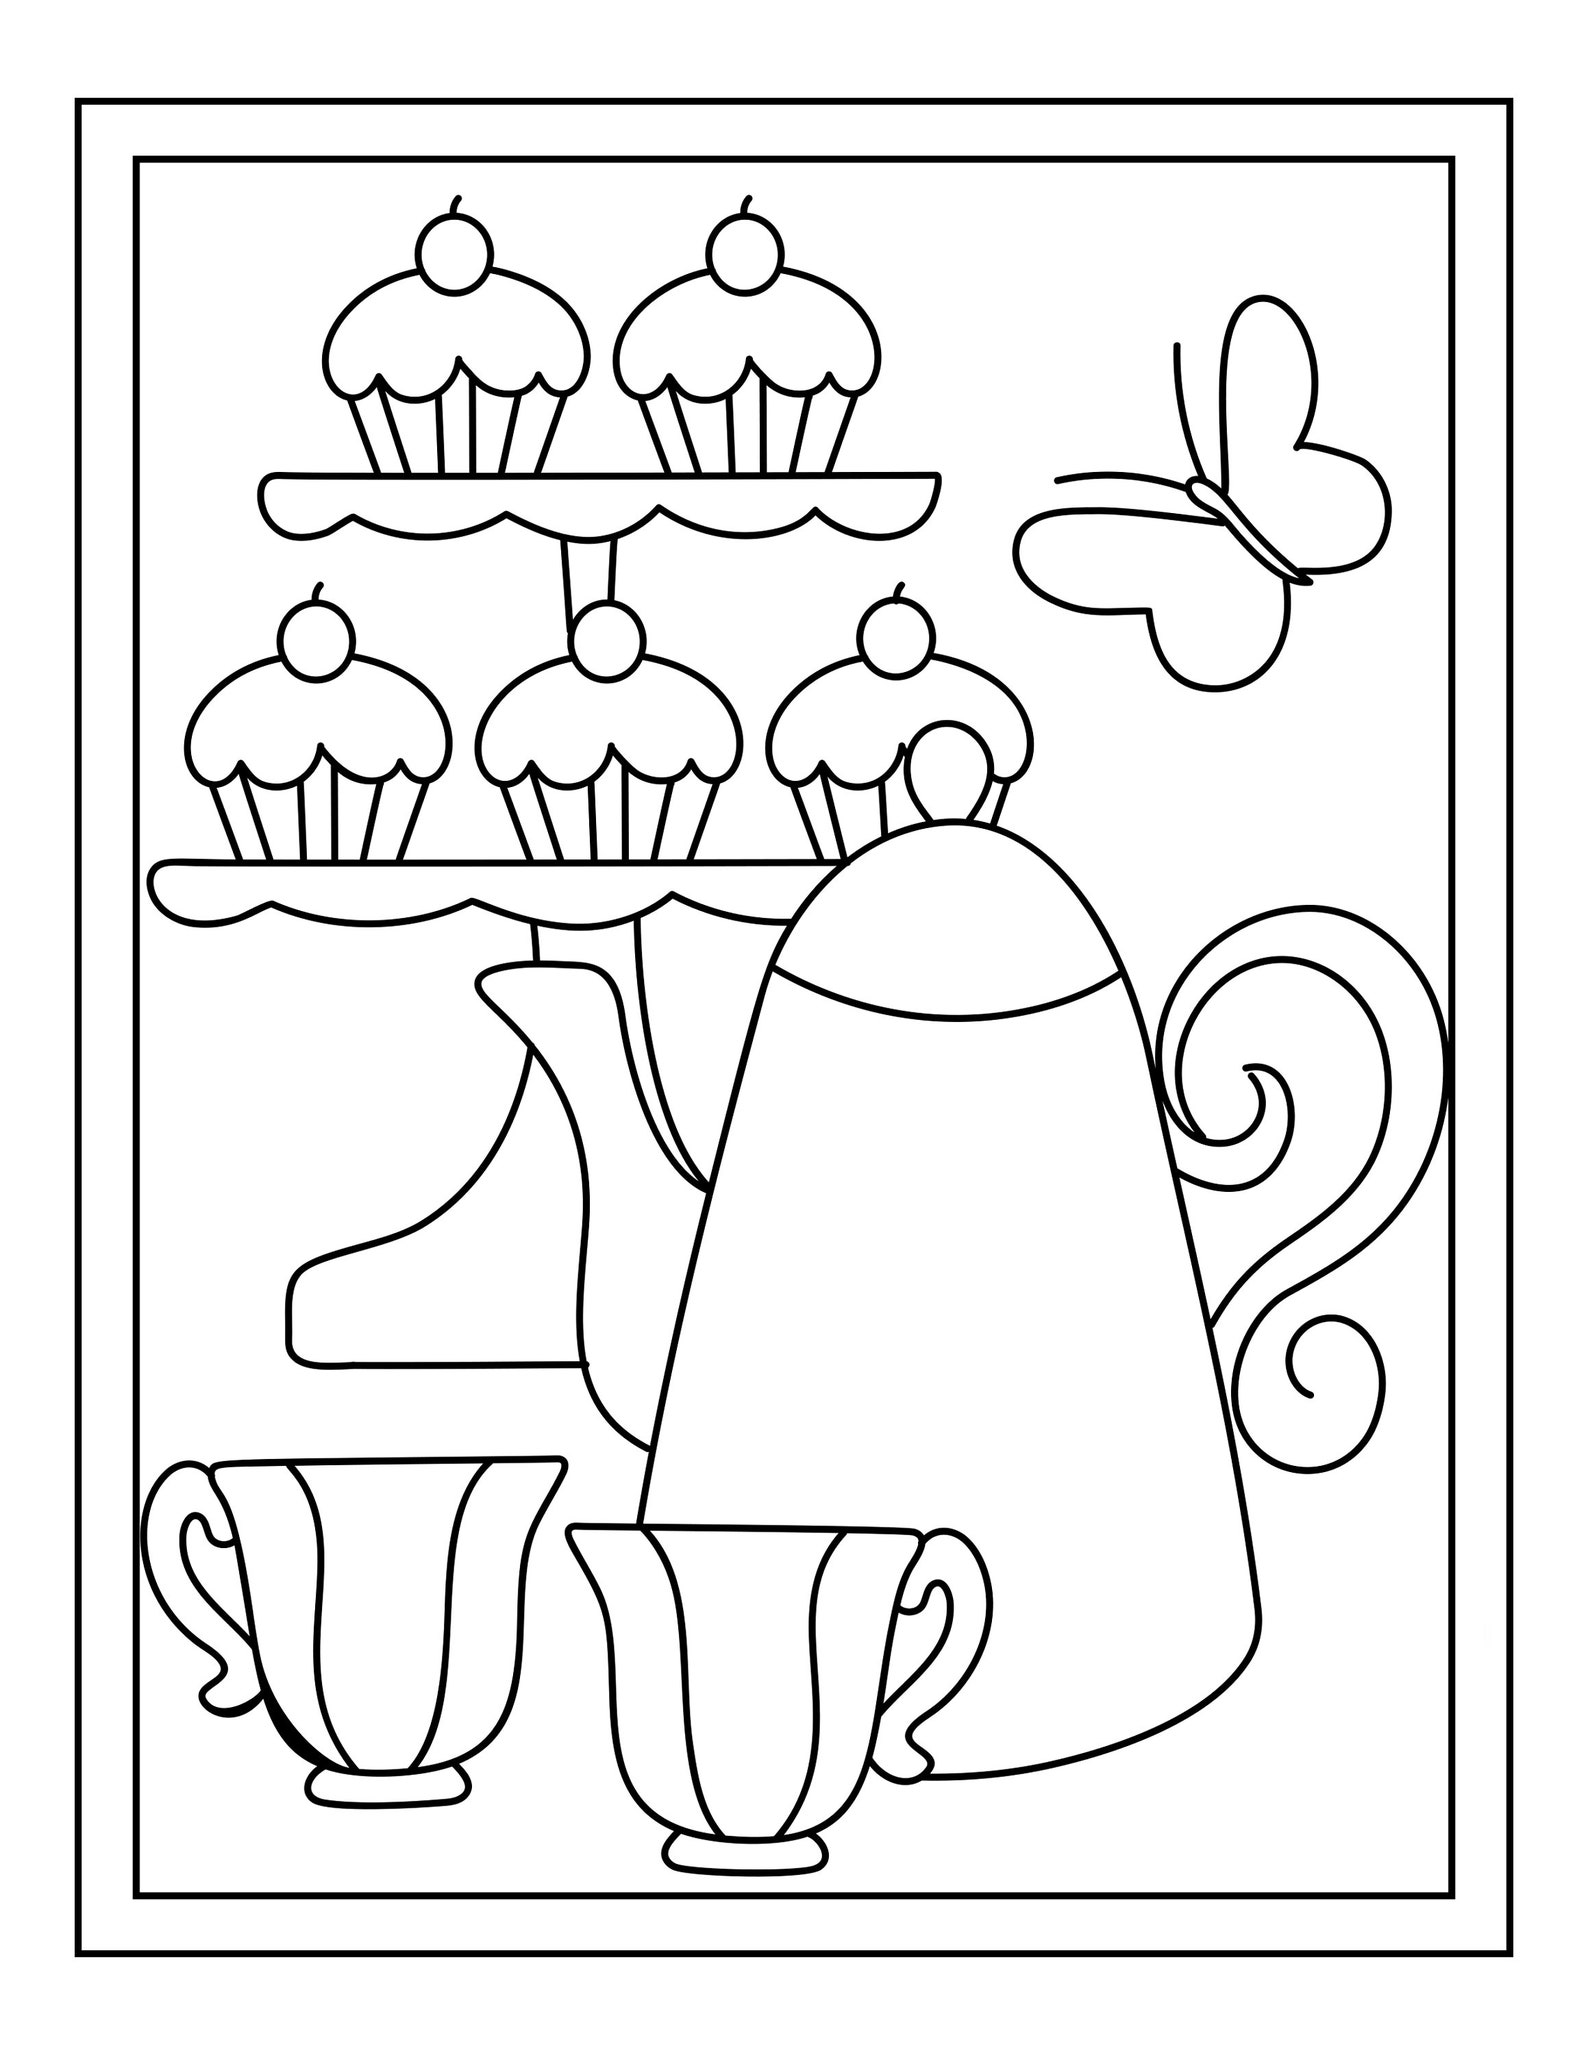 tea-party-printable-16-coloring-pages-etsy